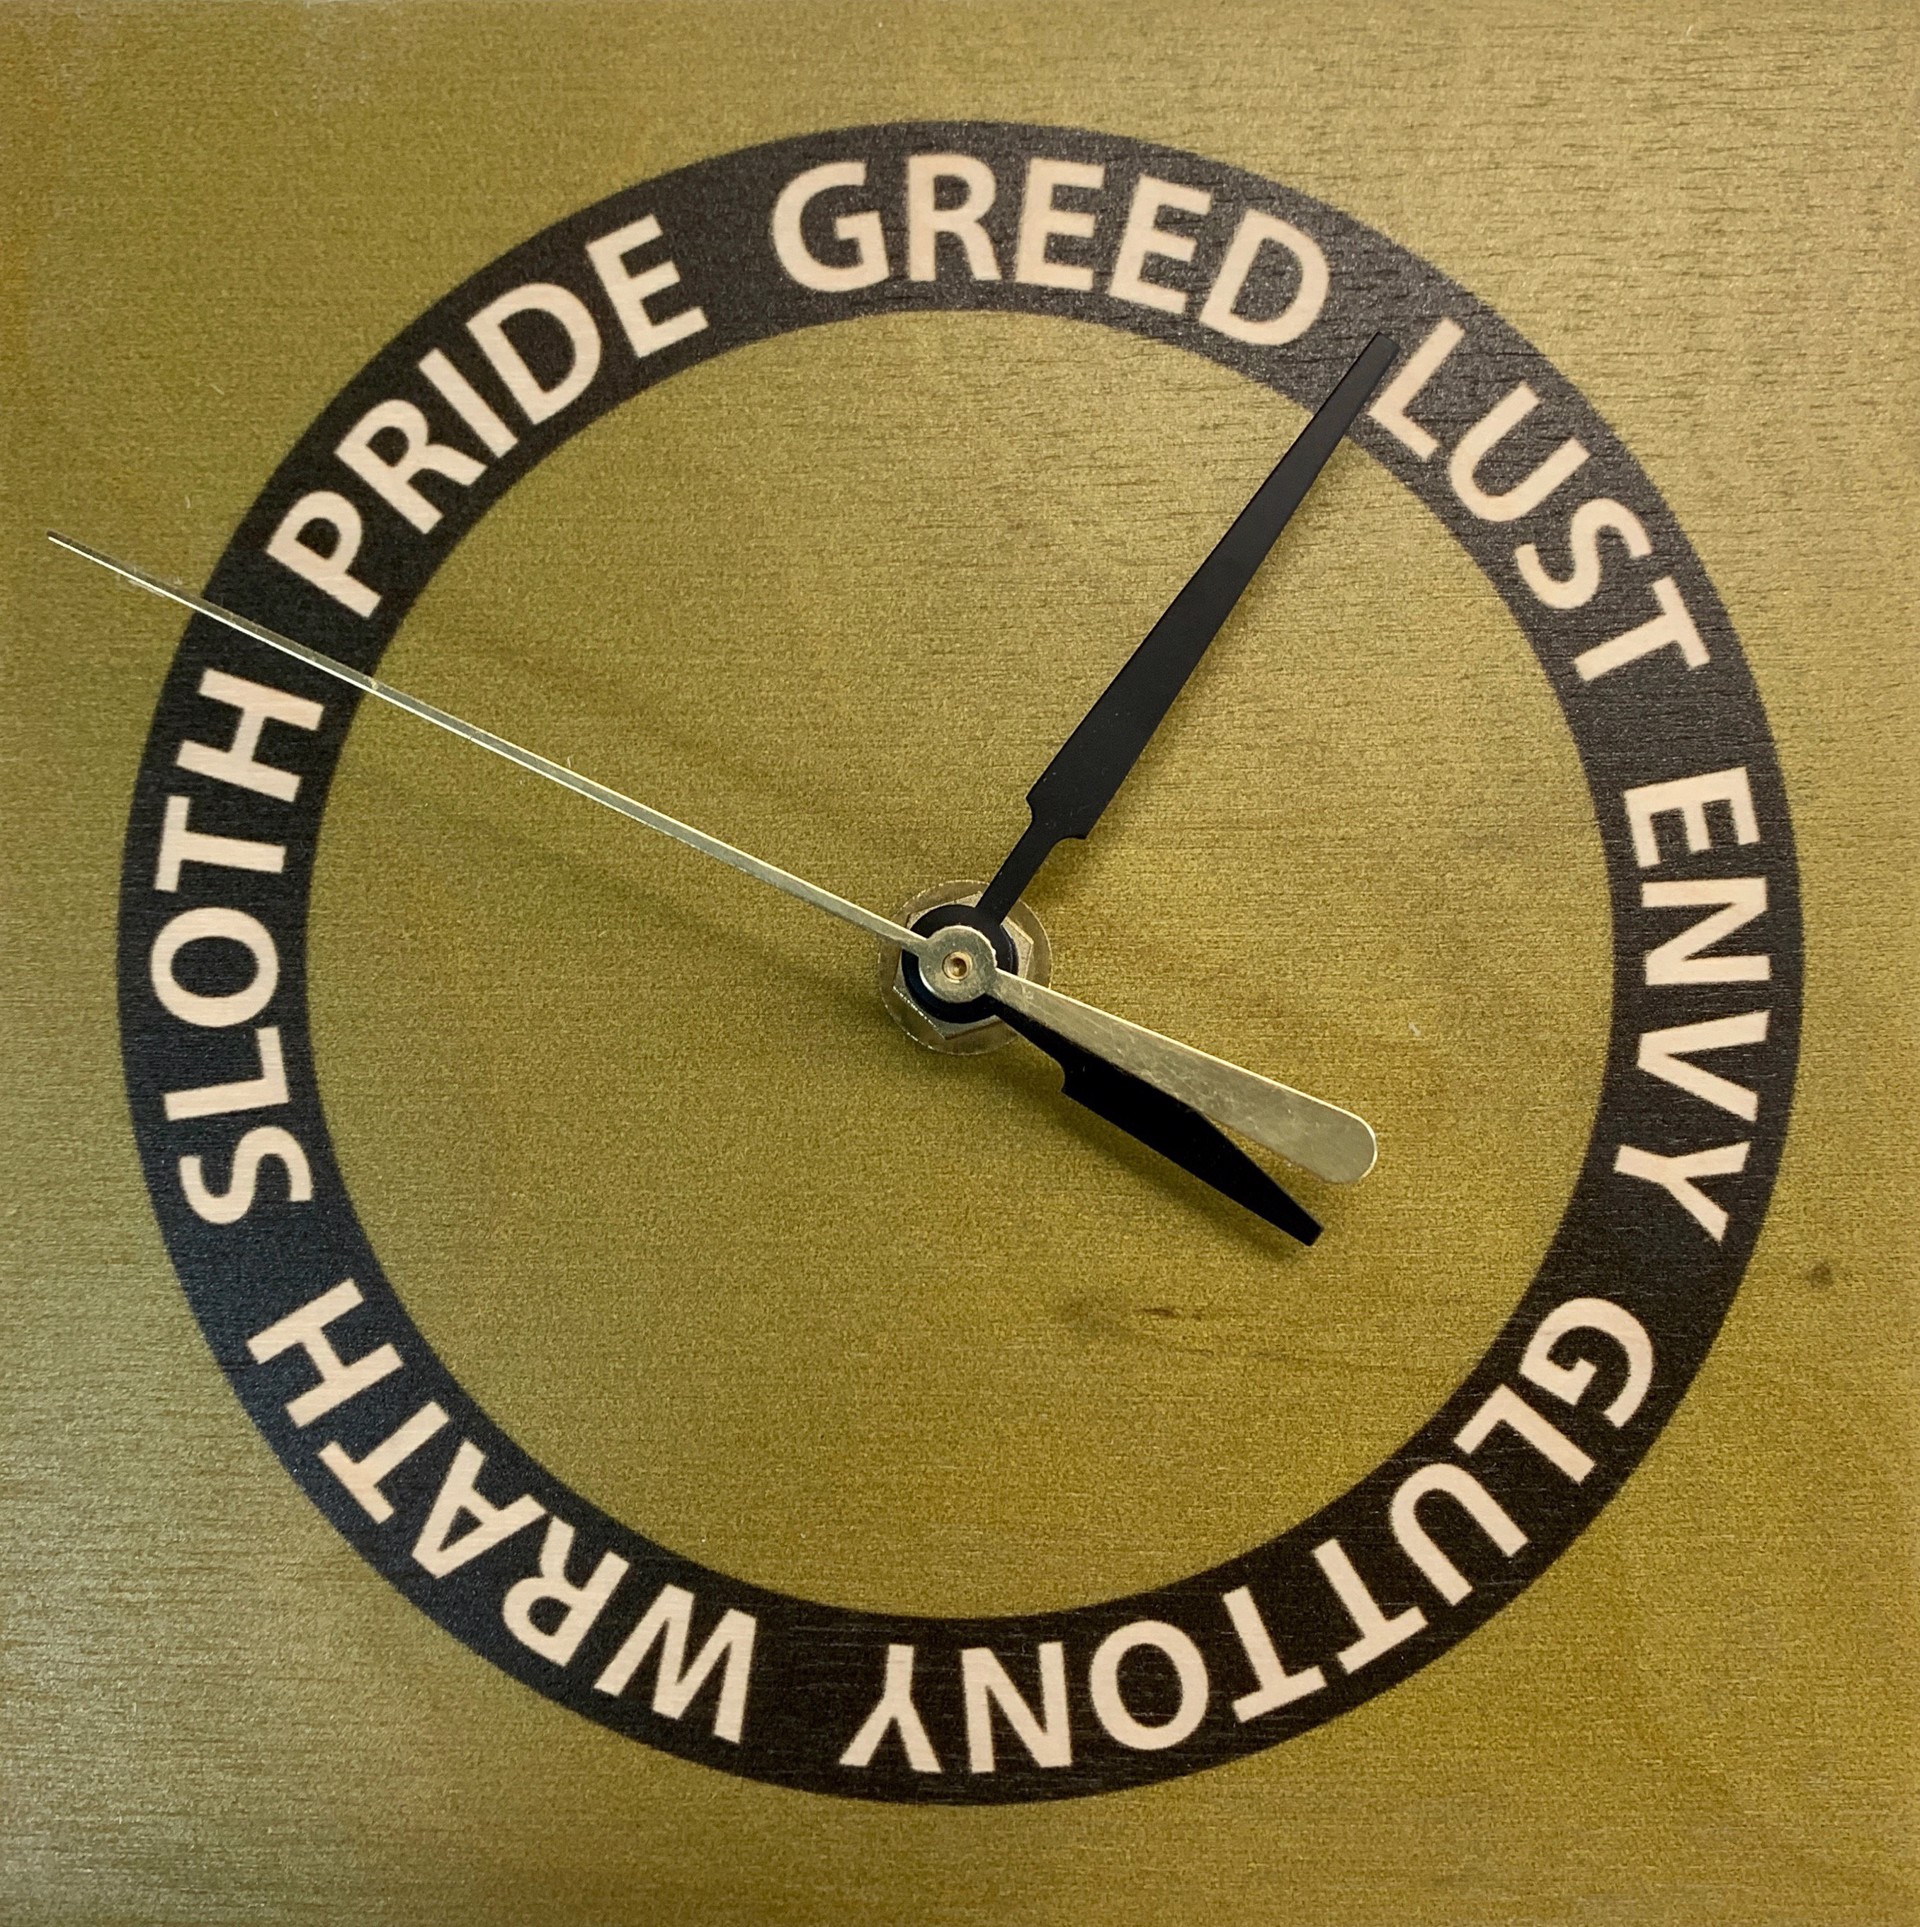 Lifecycles Phase 3, pride greed lust gluttony warmth sloth by Stephen Anderson